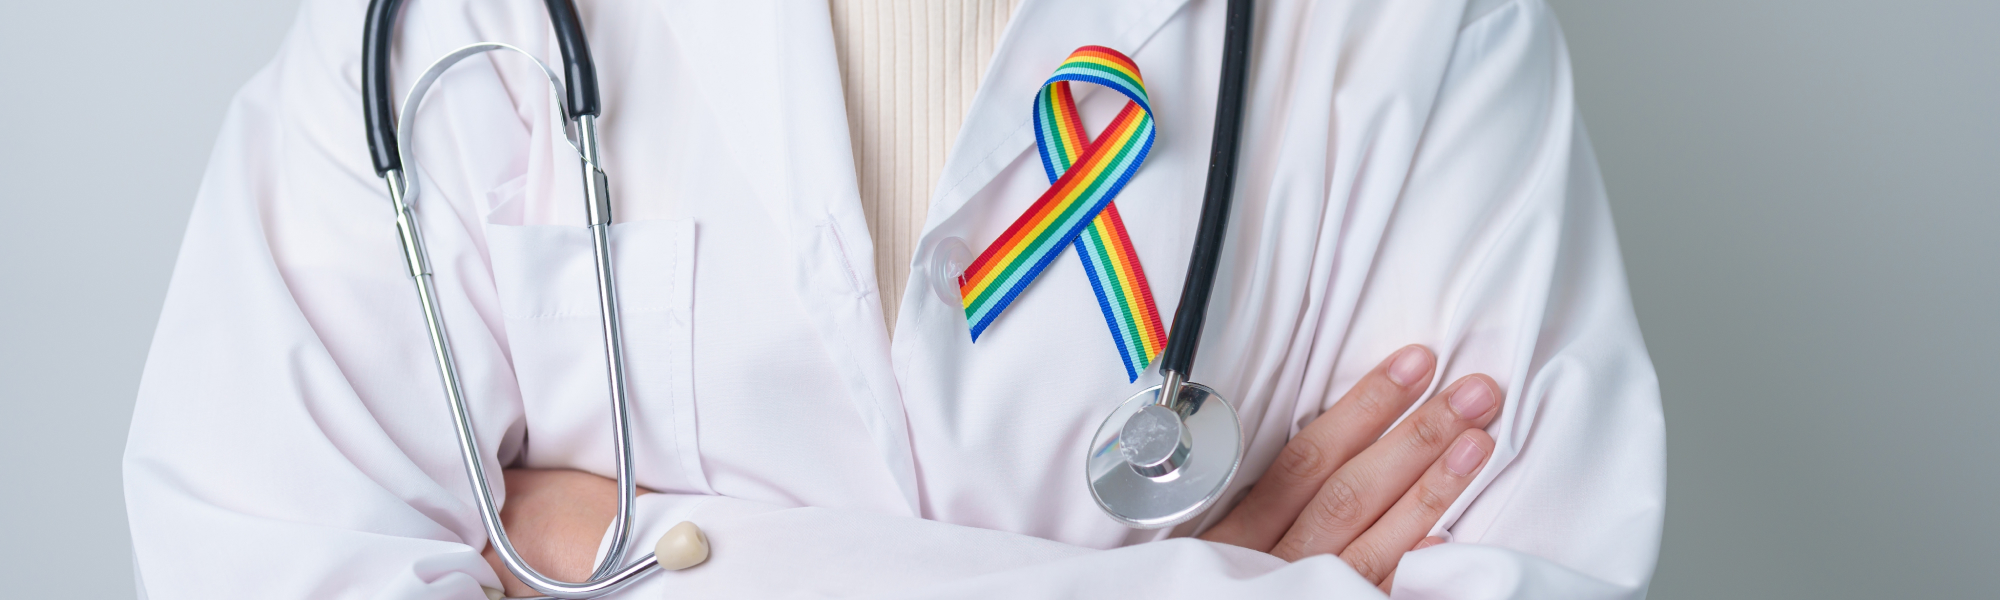 pharmacist with rainbow ribbon pin on their lab coat